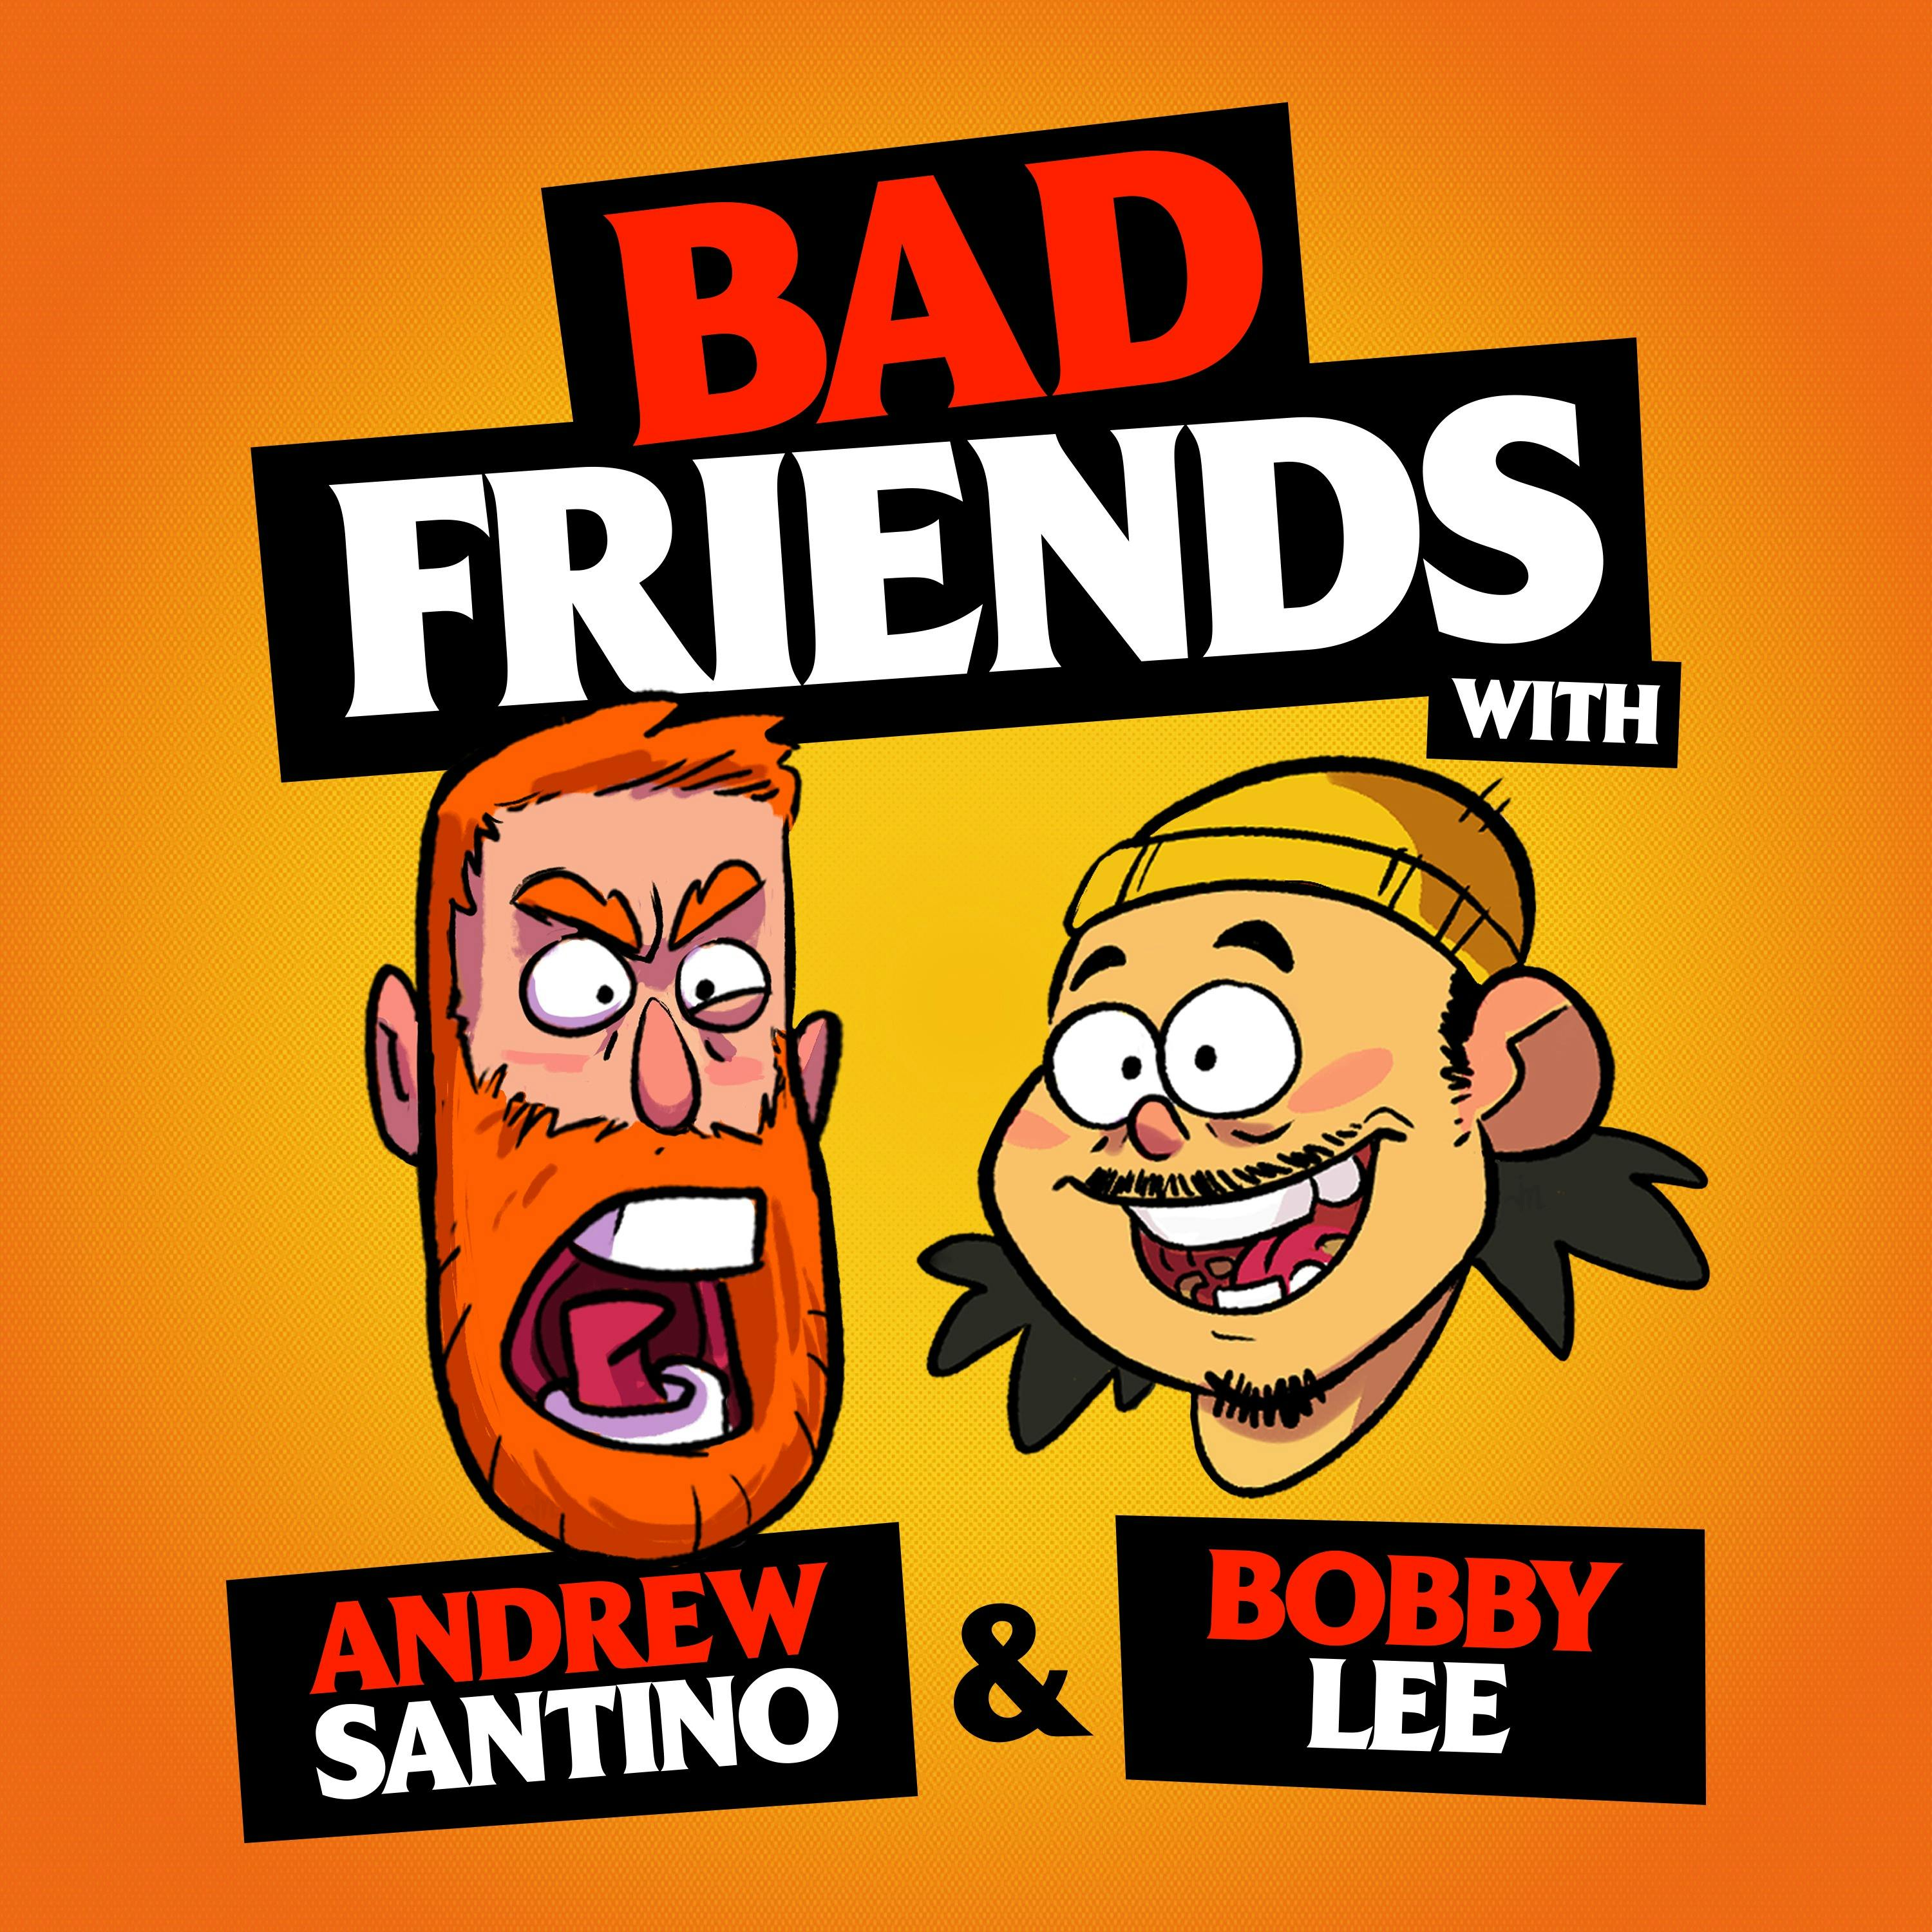 The Dark Side Of Bobby Lee by Andrew Santino and Bobby Lee